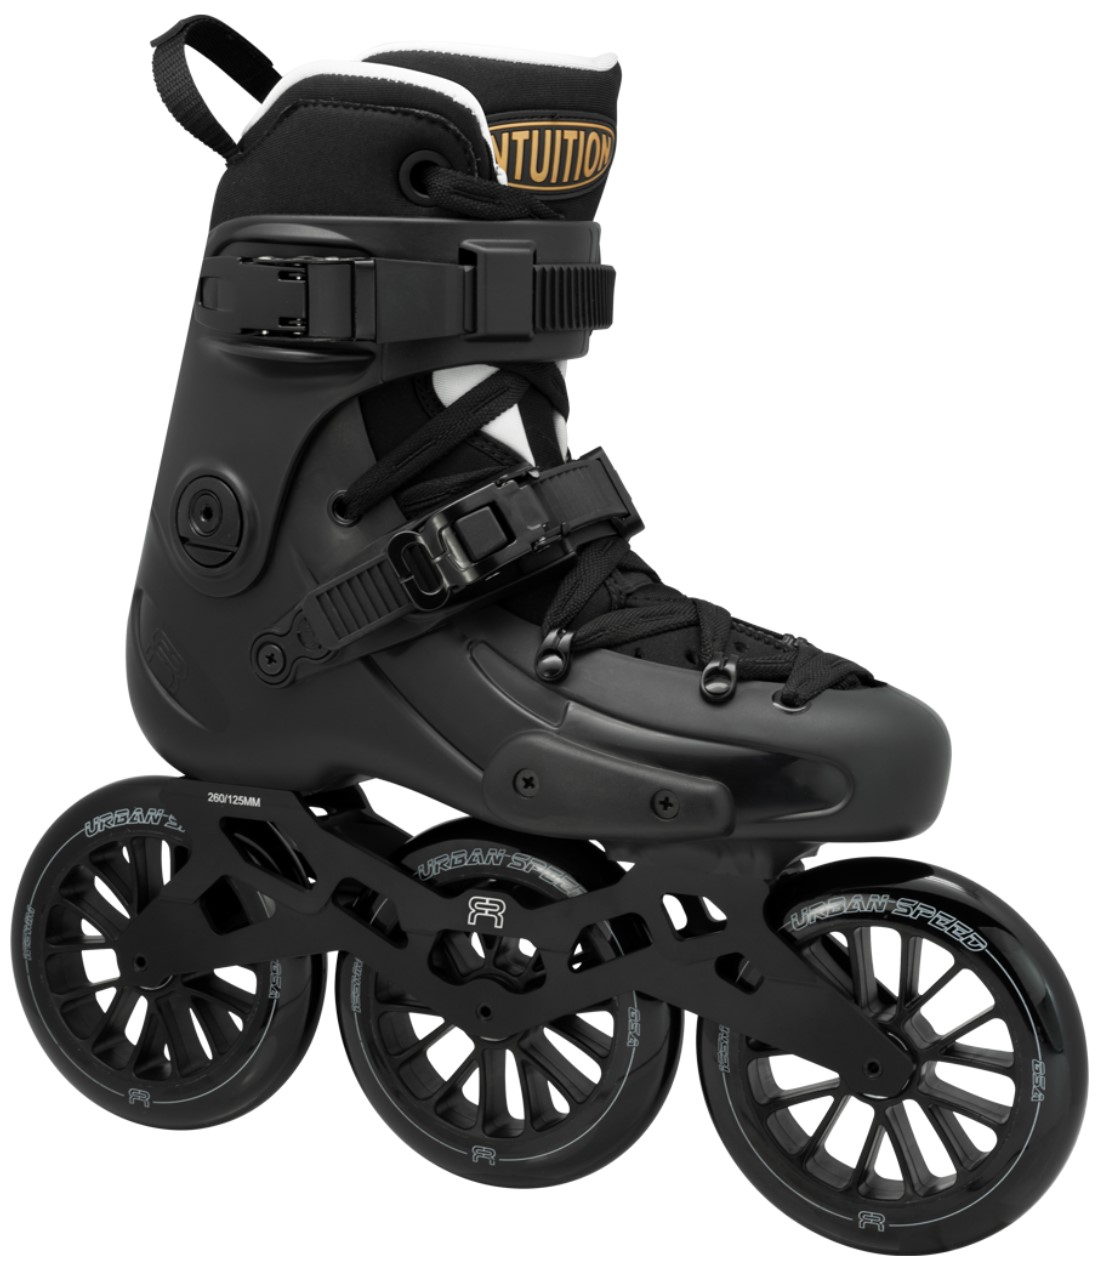 black FR1 325 Intuition inline skate for urban speed skating with three wheels of 125 mm diameter